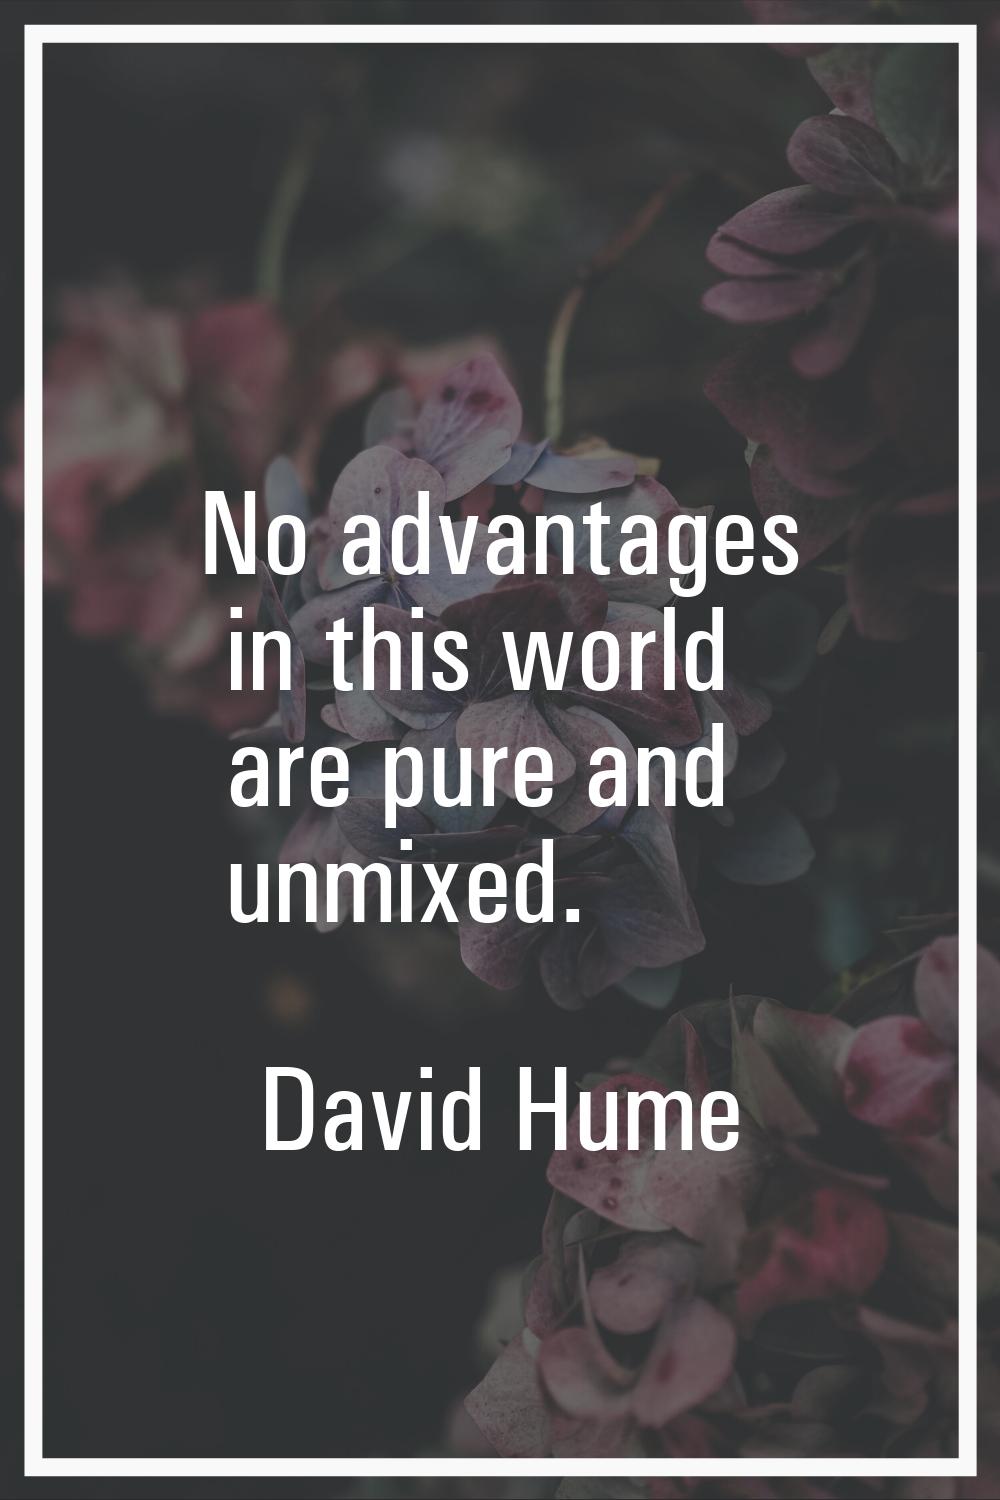 No advantages in this world are pure and unmixed.